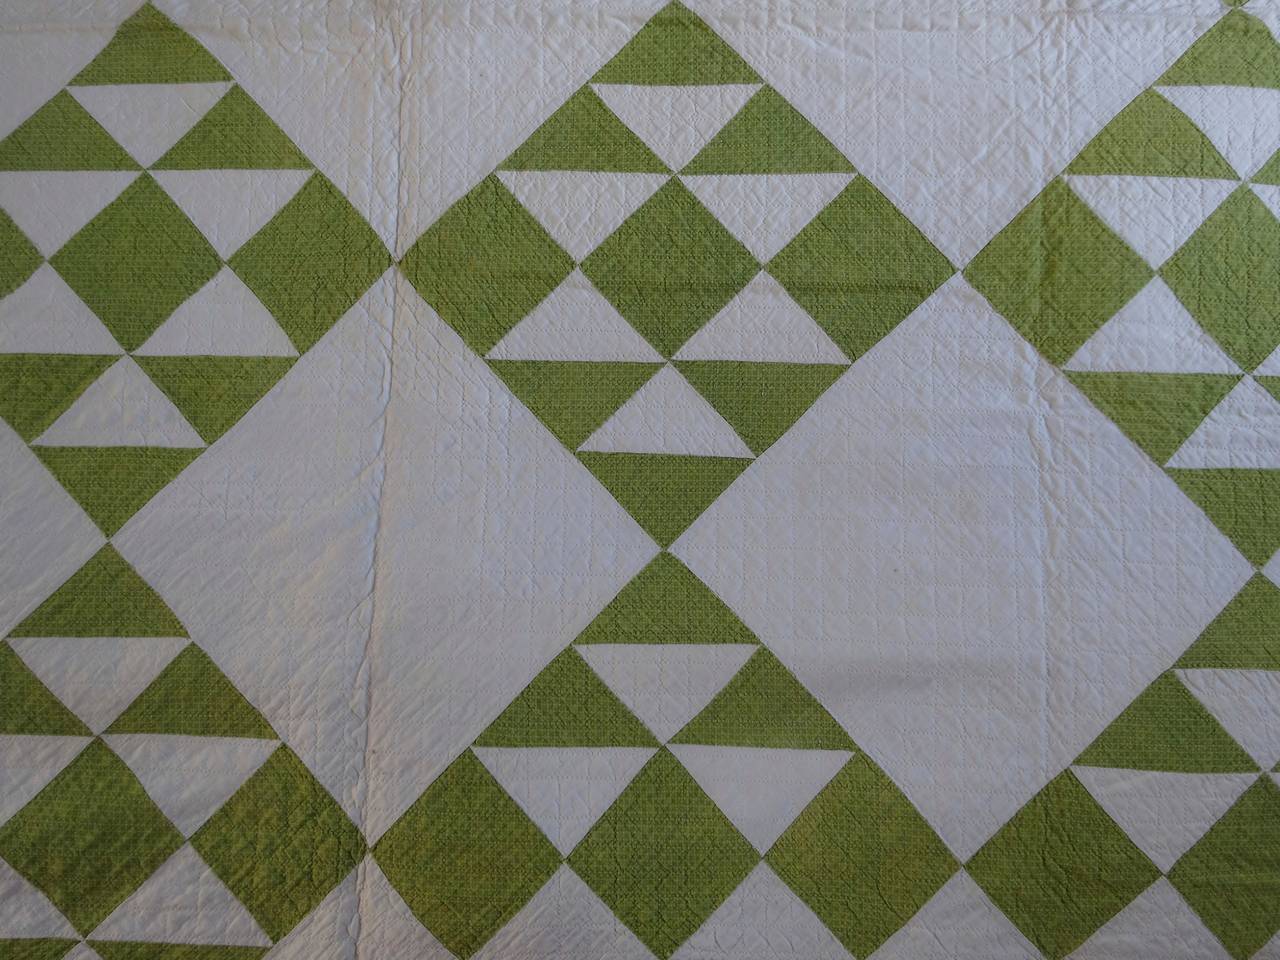 American Double Pyramids Quilt with Bold Zigzag Border